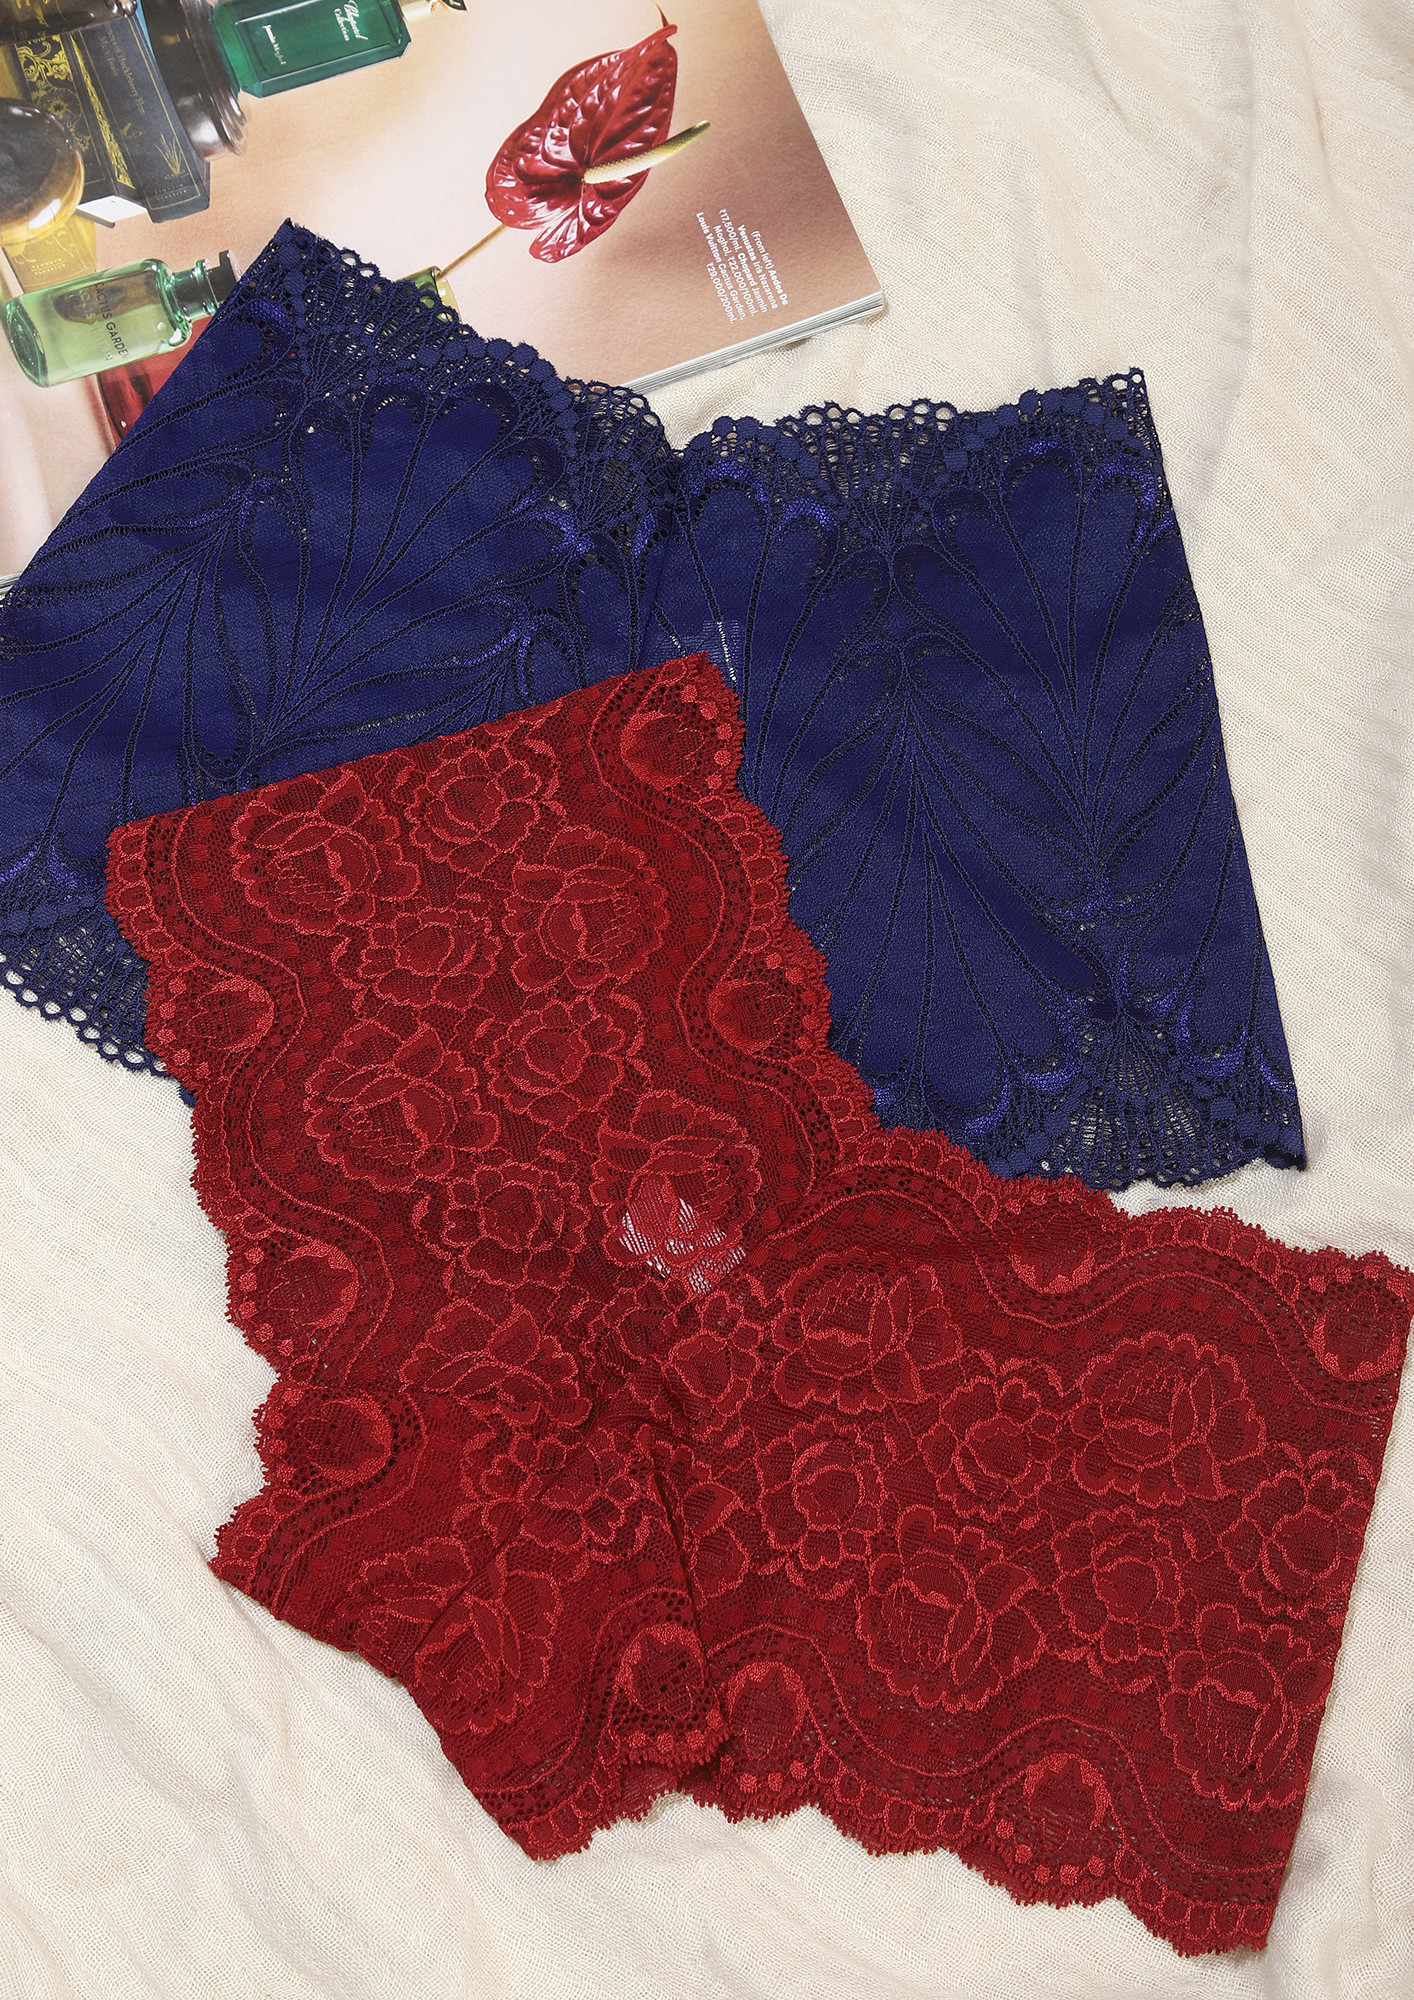 COMFORT-ATTACHED-IN-MY-MID-RISE, SOLID, PRINTED, DARK RED AND DARK BLUE , LACE-DETAIL, NYLON, BOYSHORT BRIEF SET (PACK OF 2)